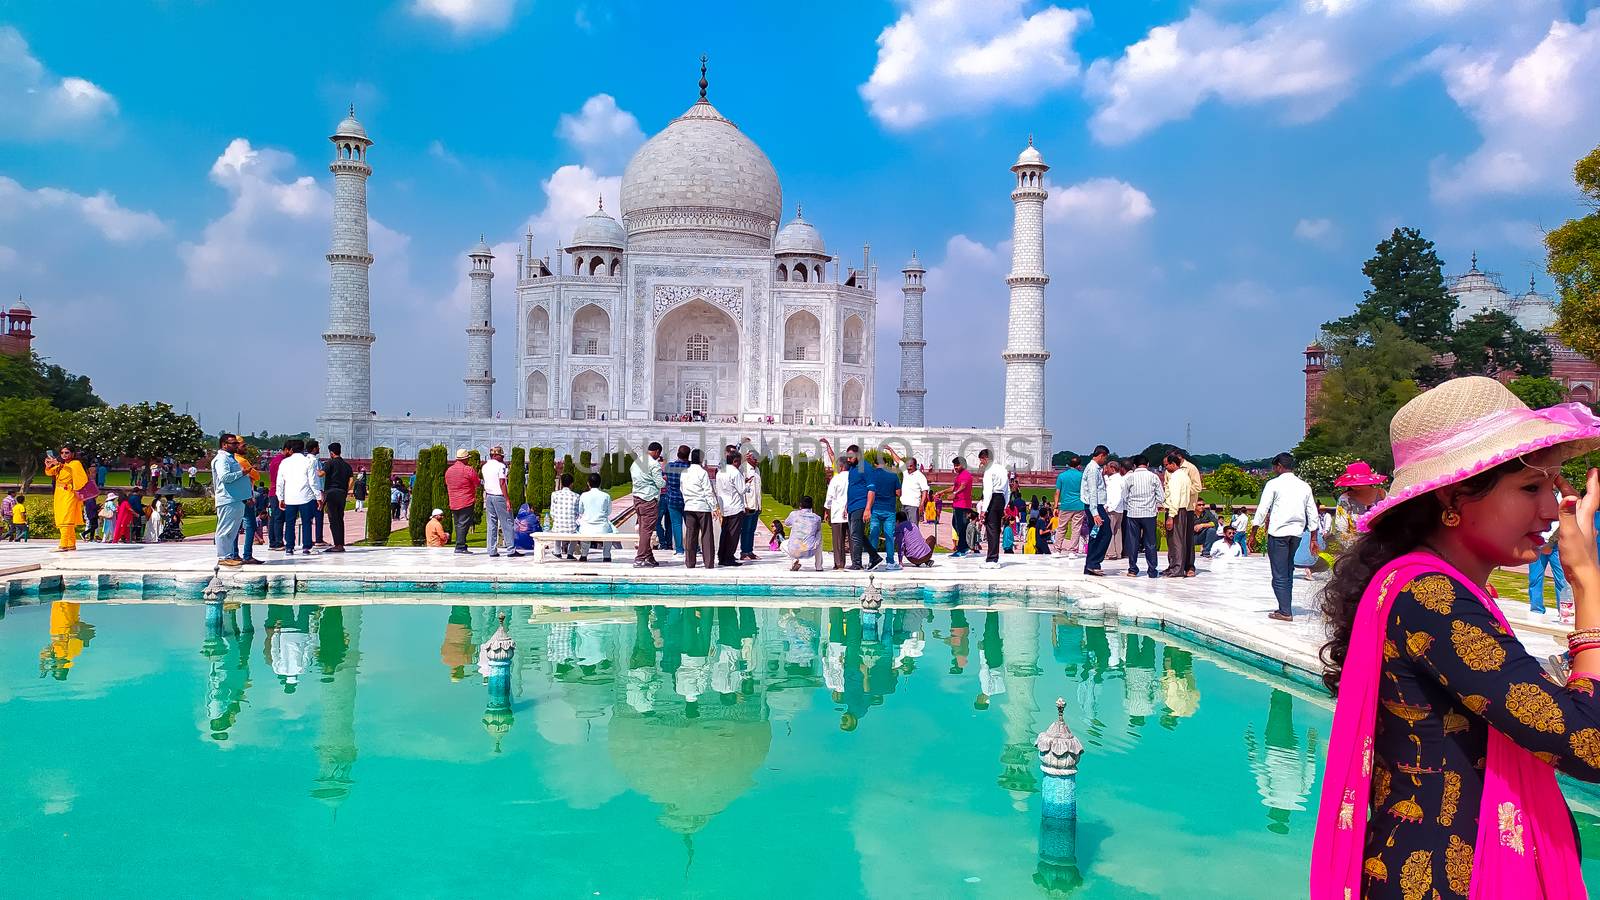 Front view of Taj Mahal with fountain pond in the foreground in sunny summer day. Taj Mahal tomb with reflection in the water at blue dramatic sky in Agra, Uttar Pradesh, India South Asia Pac May 2019 by sudiptabhowmick